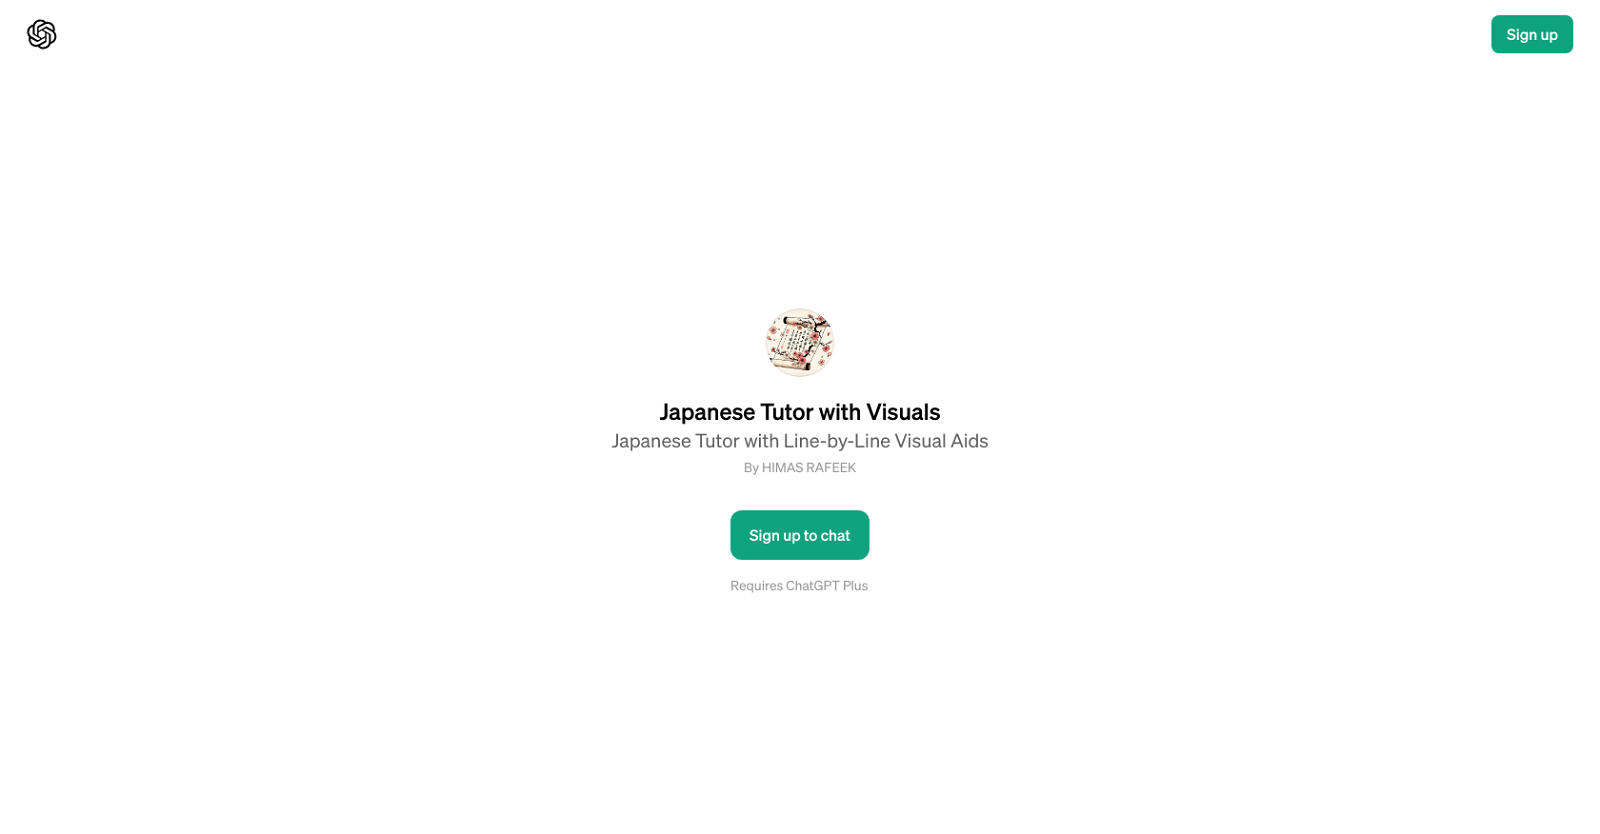 Japanese Tutor with Visuals website